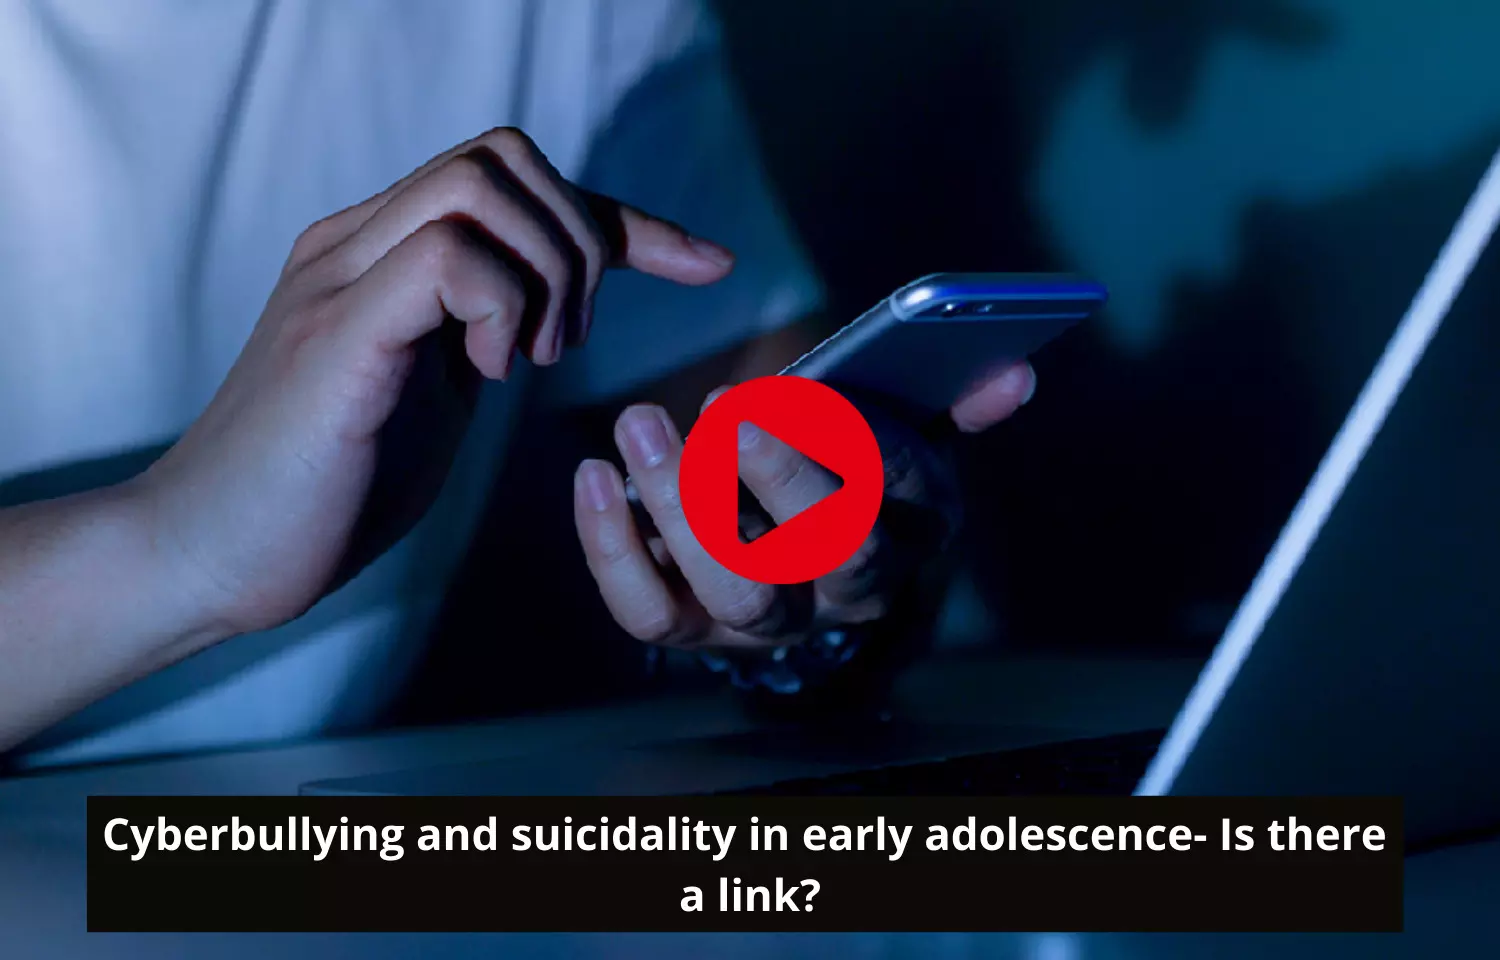 Cyberbullying and suicidality in early adolescence- Is there a link?